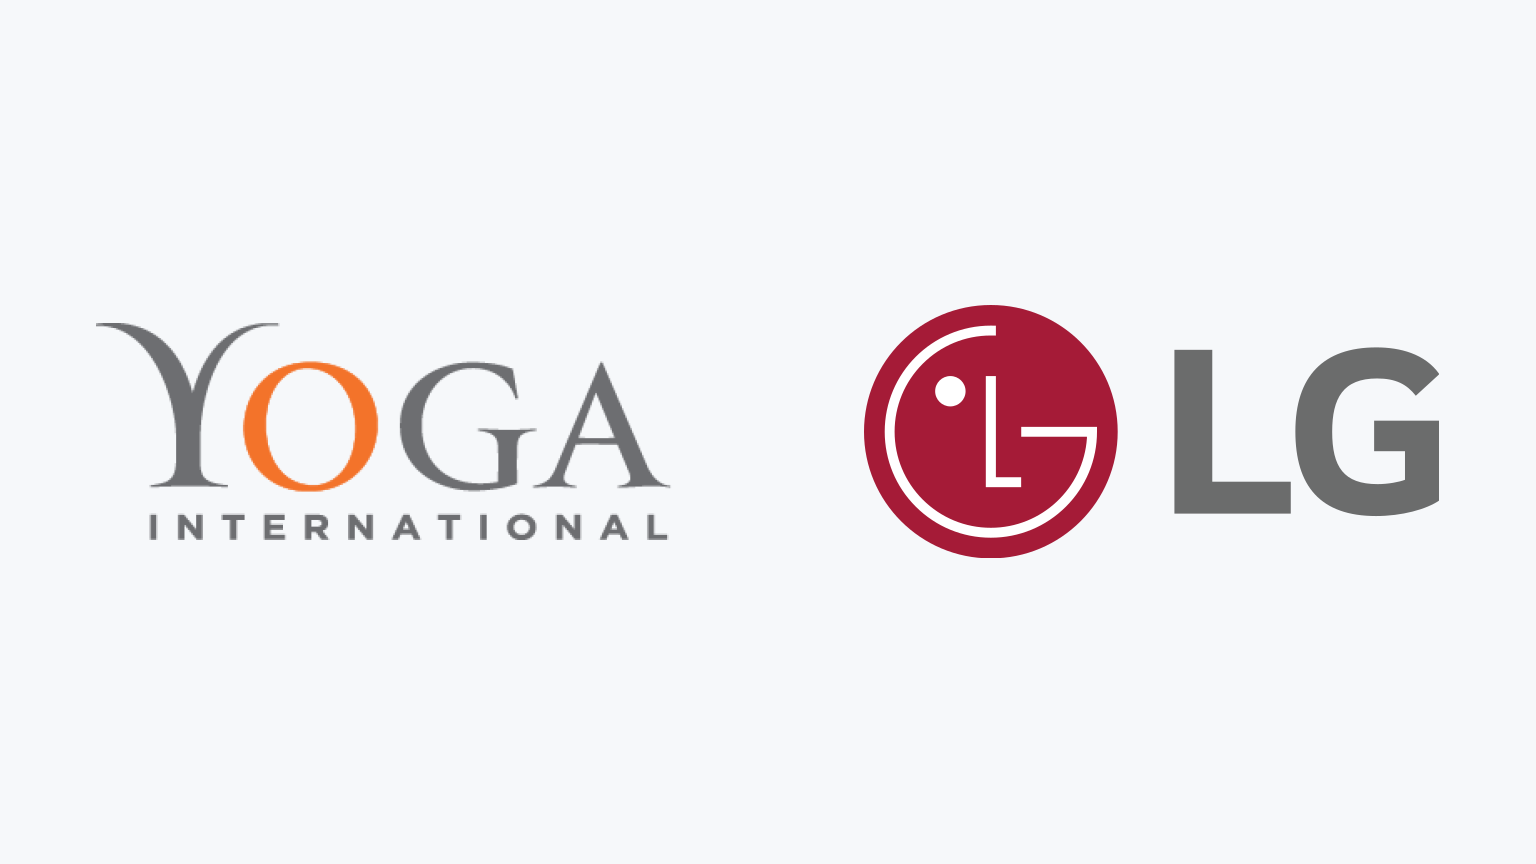 How to Watch Yoga International on LG Smart TV – The Streamable